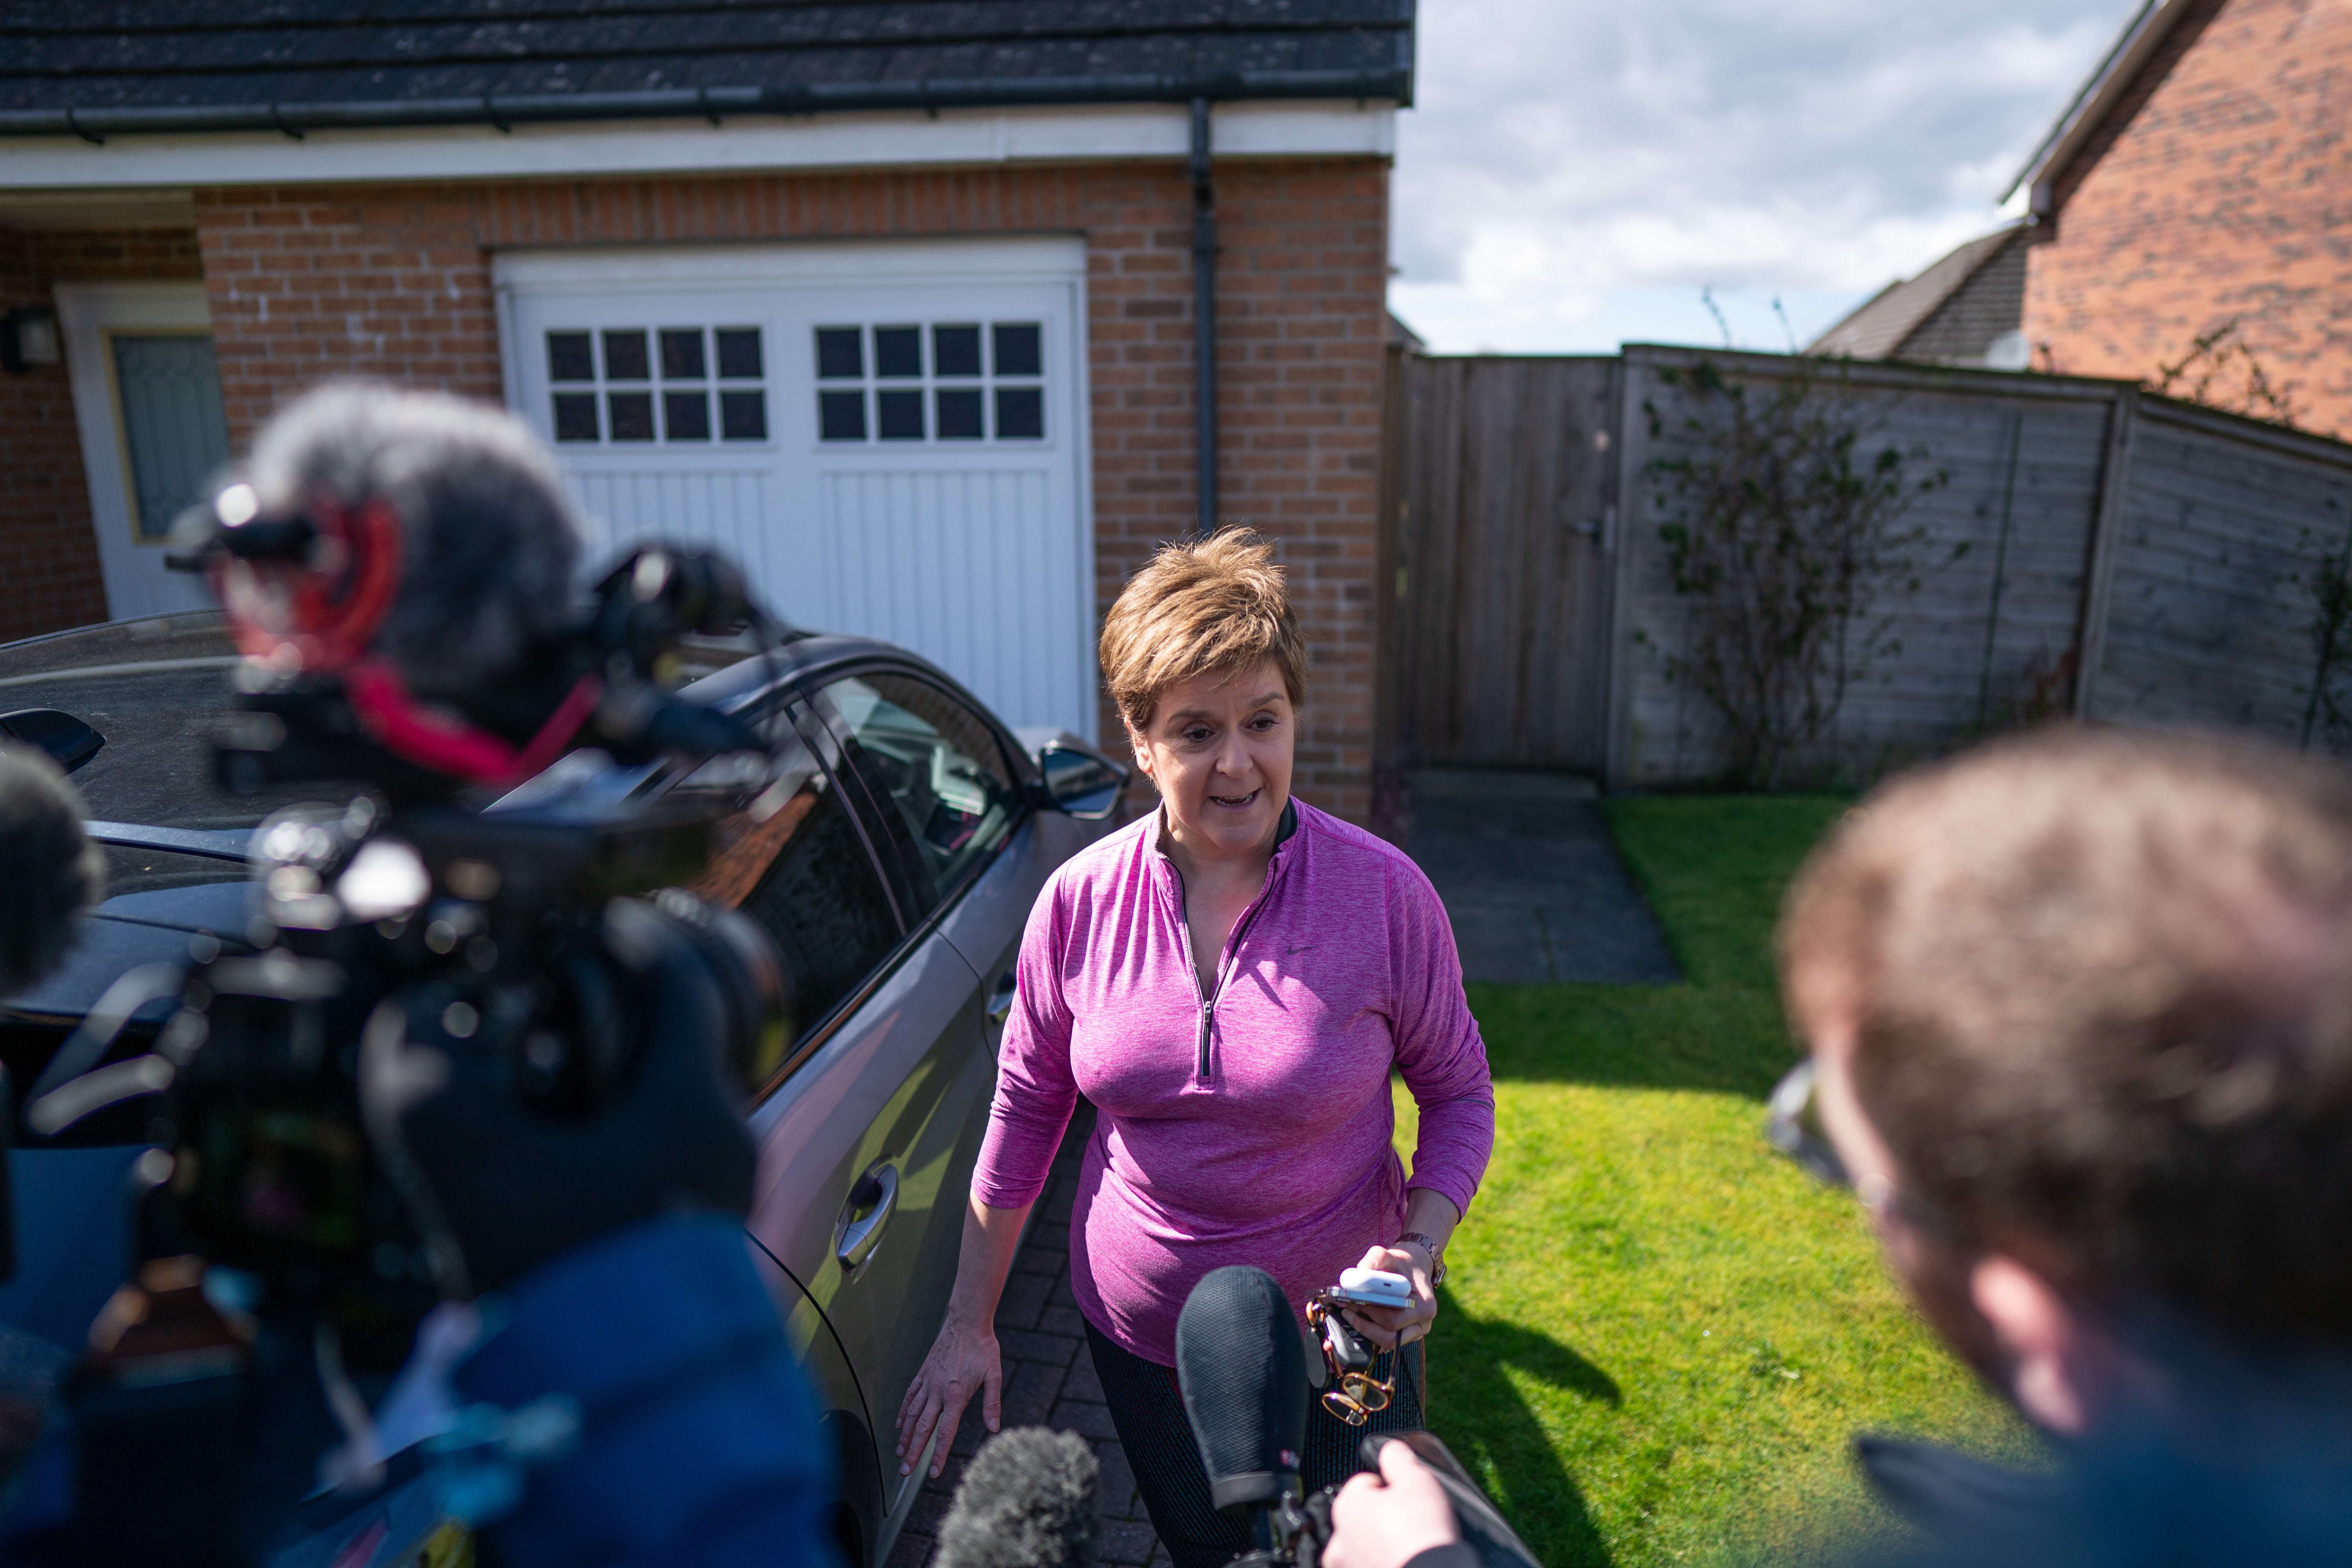 Nicola Sturgeon speaks to reporters outside her home near Glasgow after her husband was charged by police